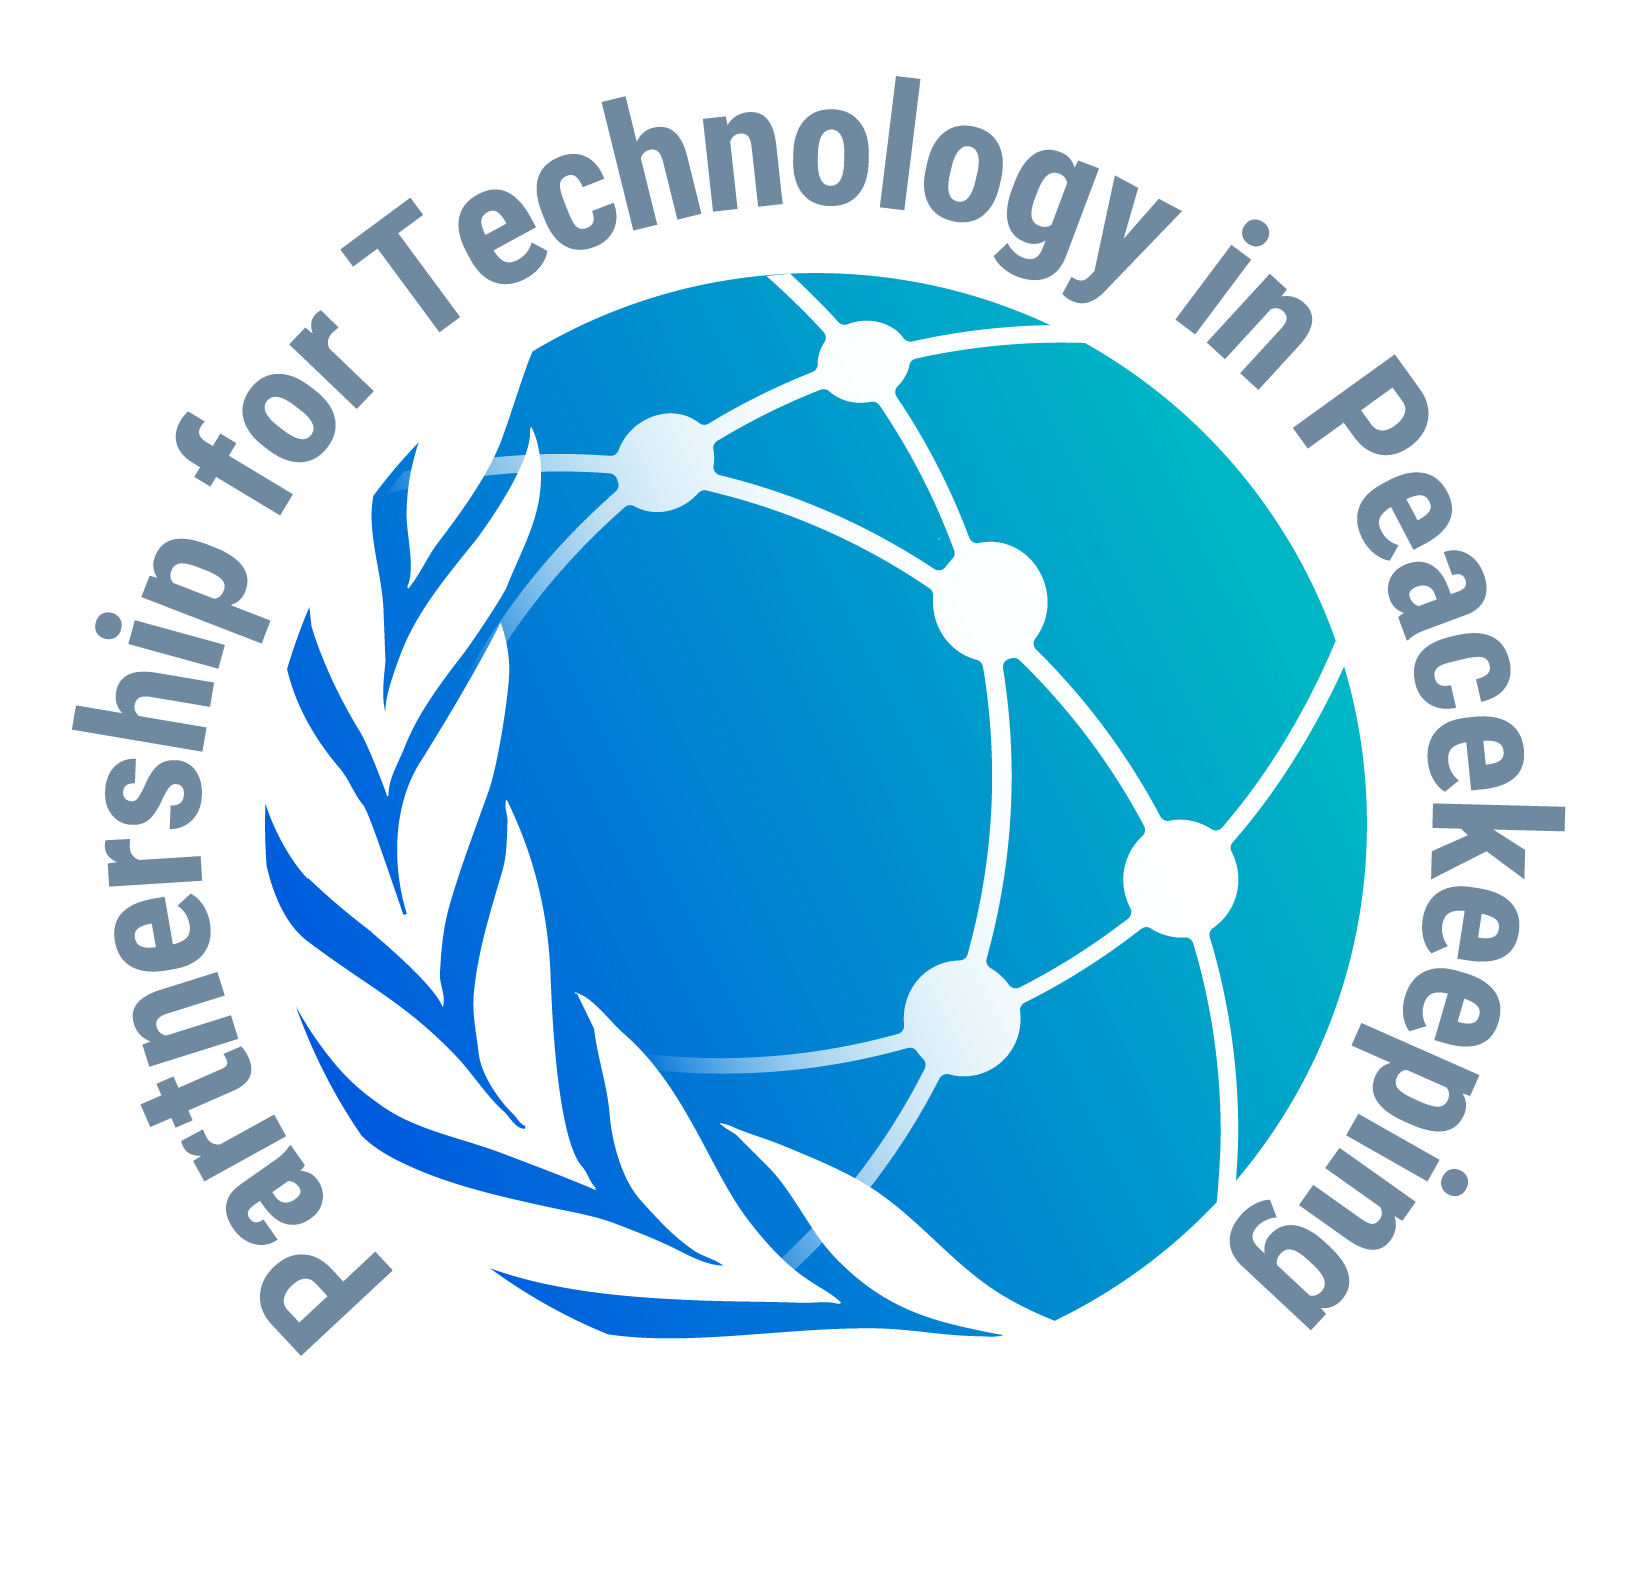 Nepal to host international symposium on technology in peacekeeping